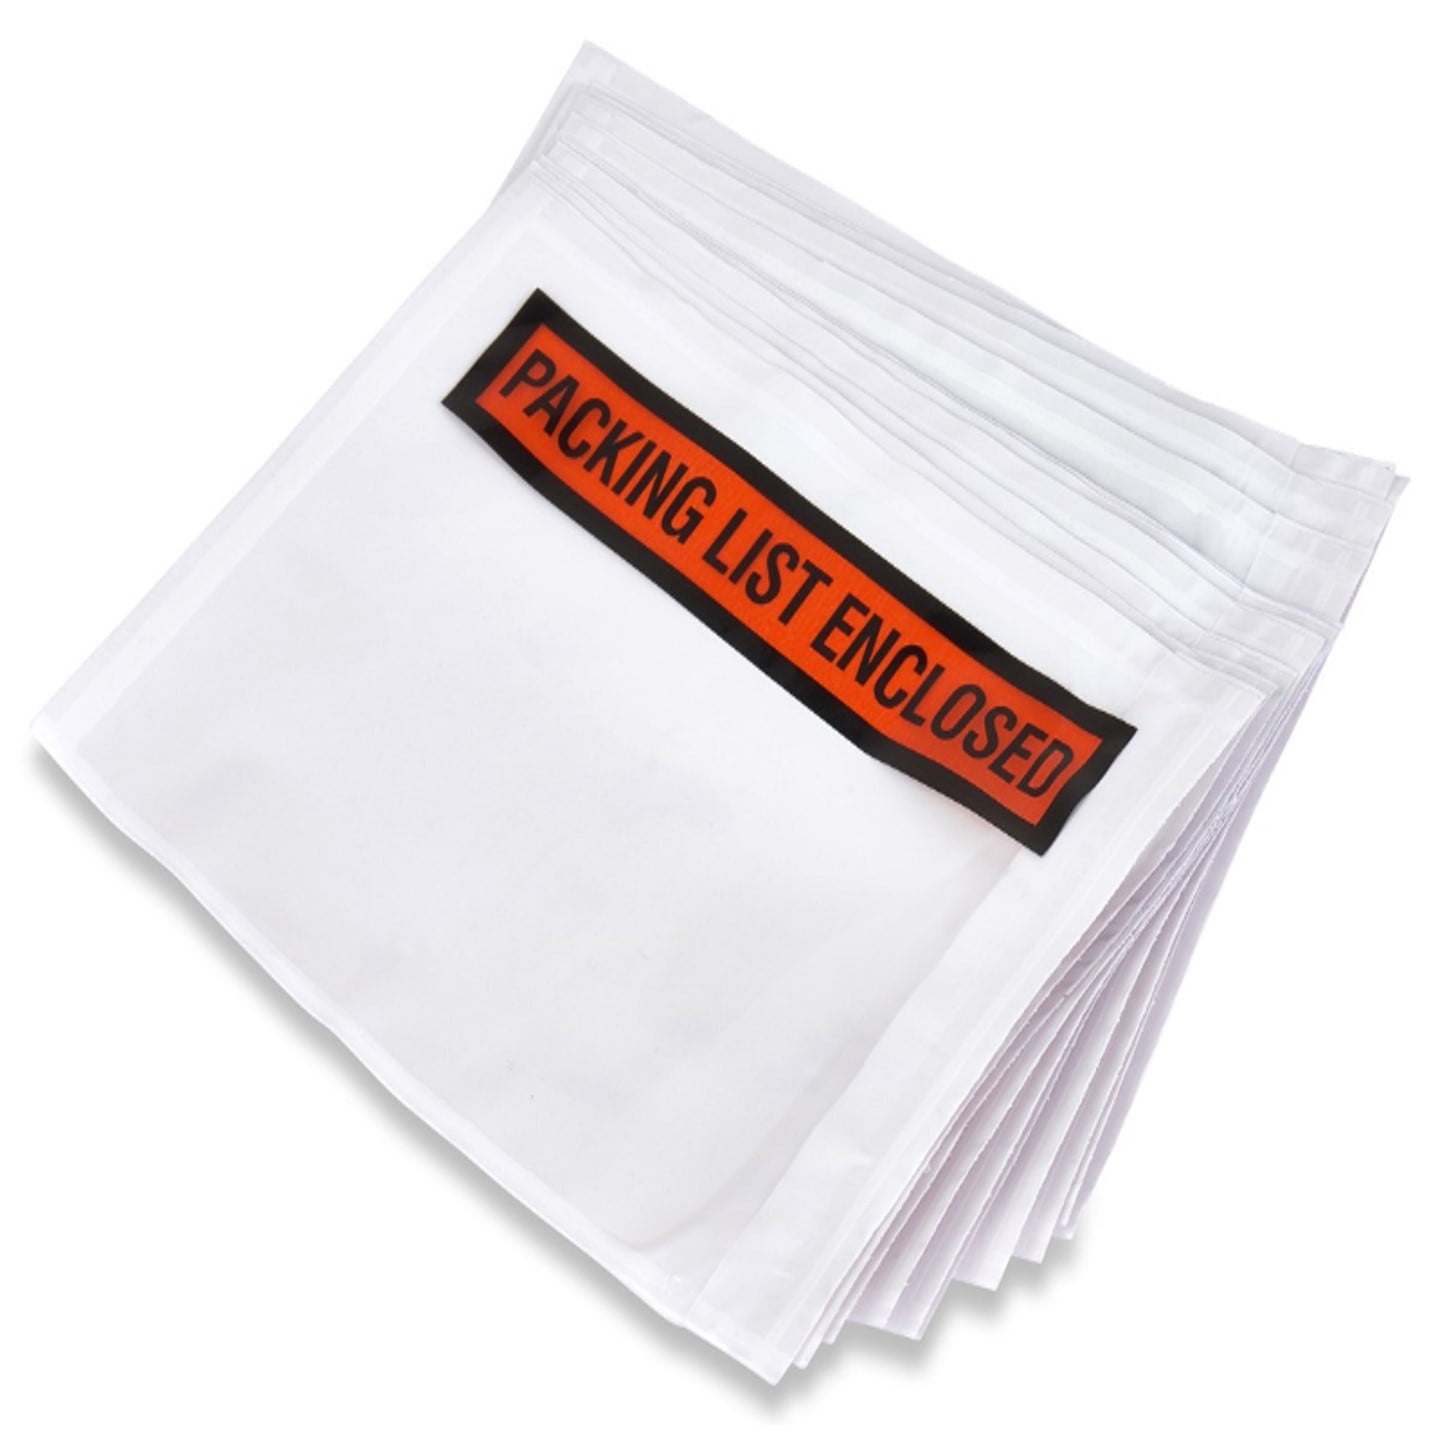 6 x 9 Clear Adhesive Top Loading Packing List/Shipping Label Envelopes 1000 Packs BESTEASY Packing List Pouches 